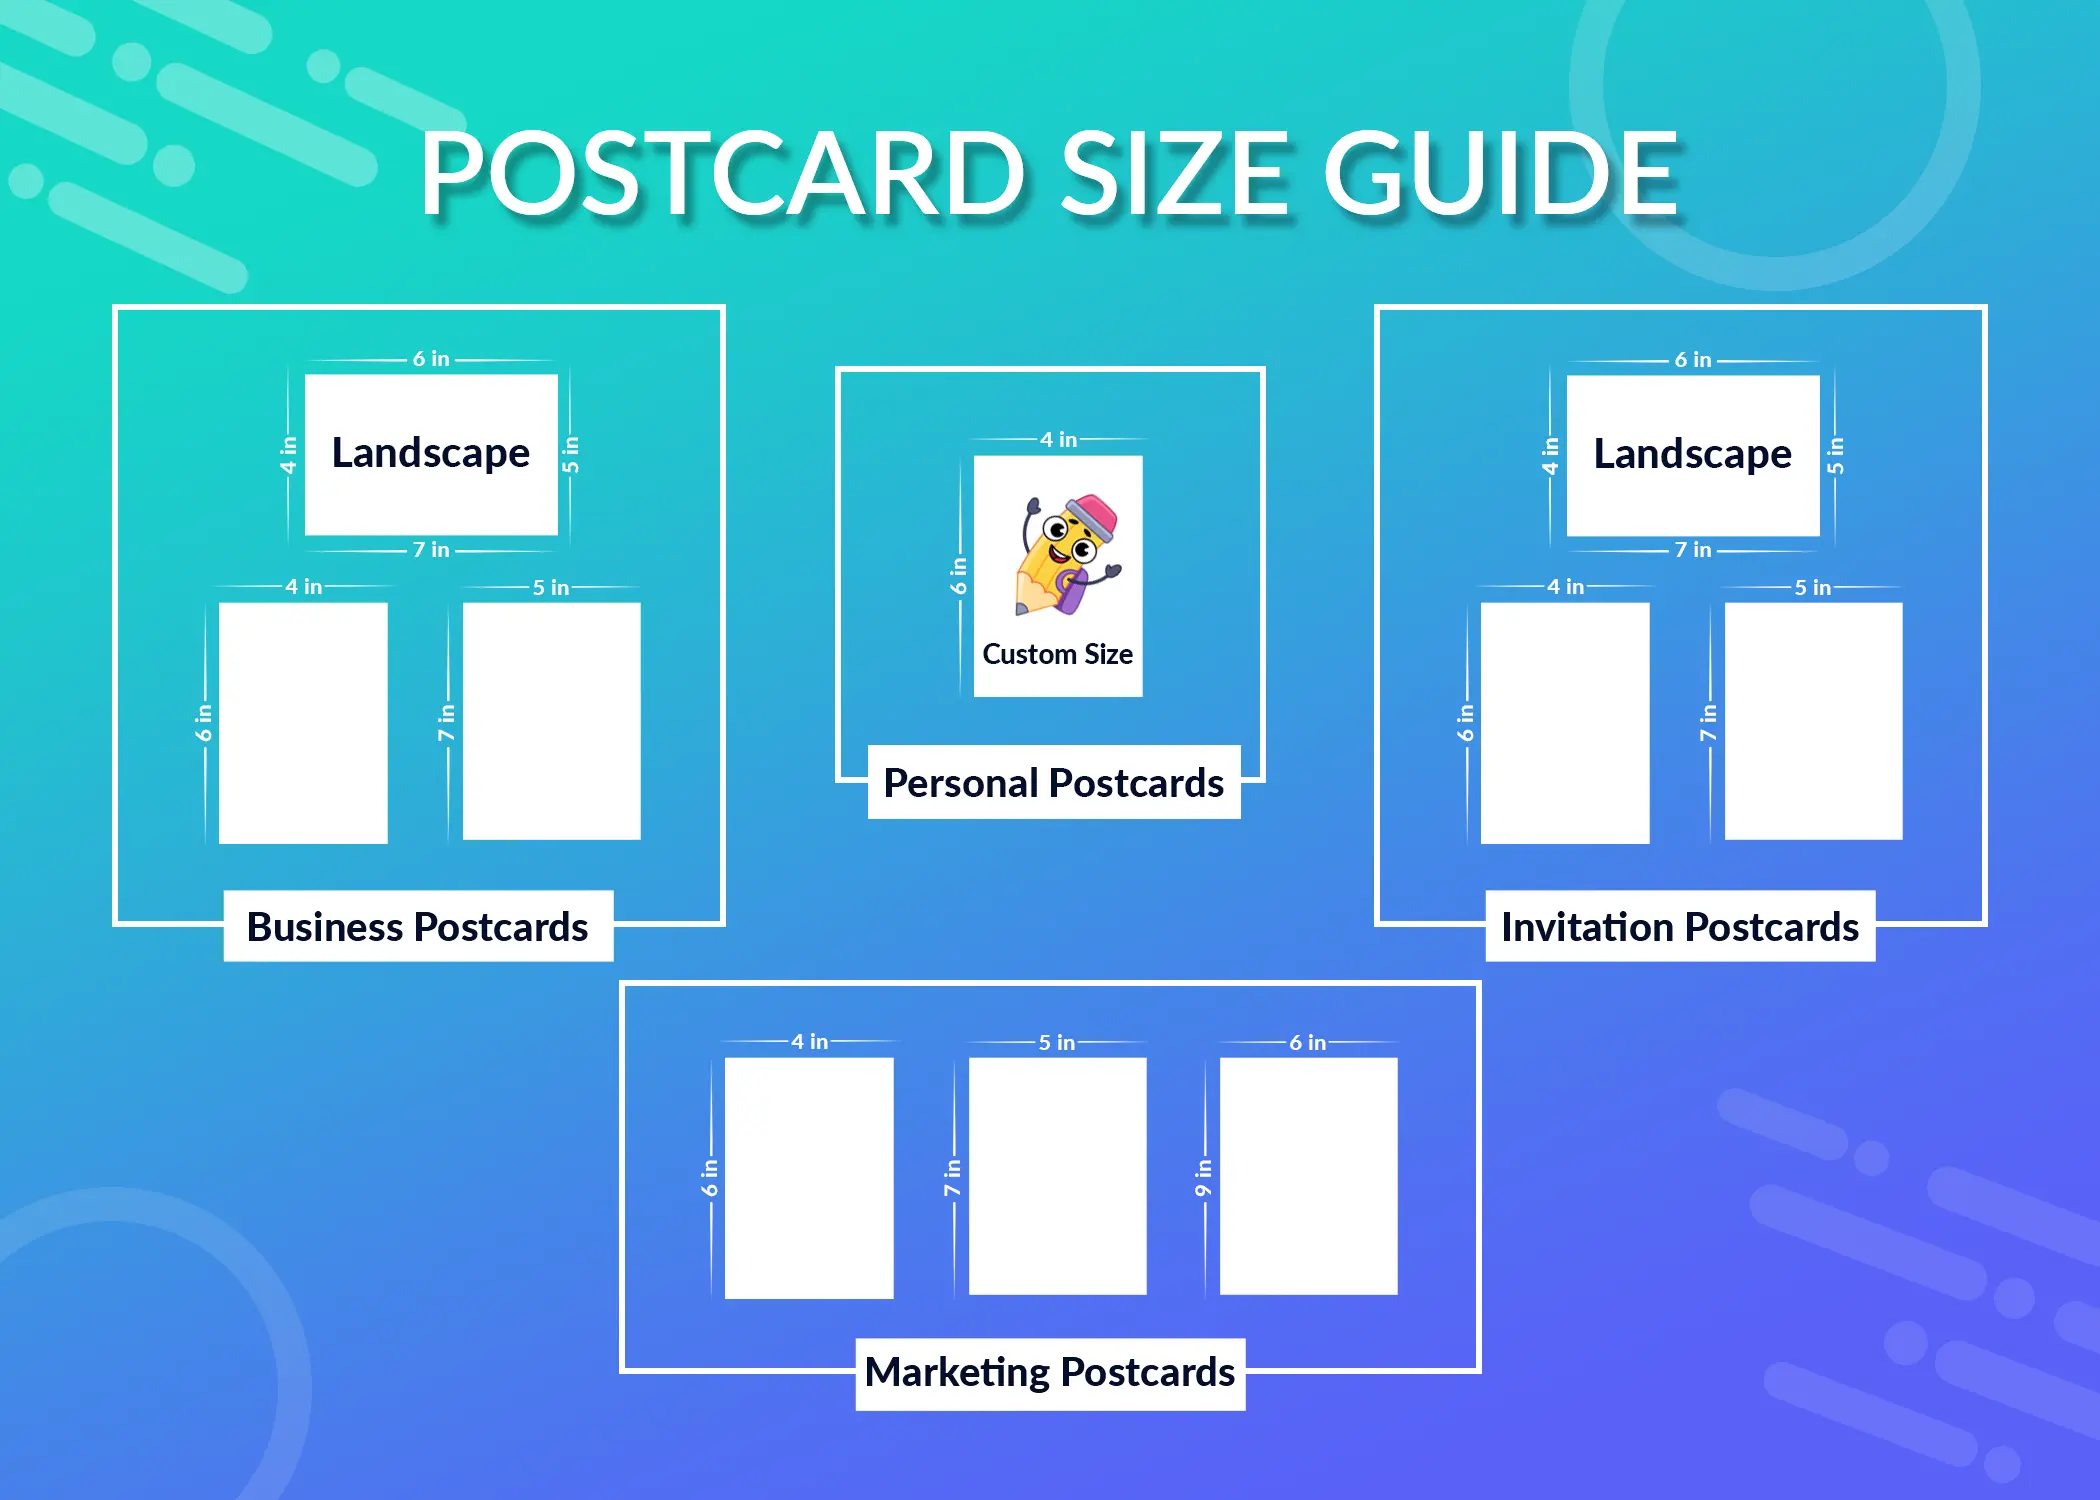 Standard Postcard Size Guide: Dimensions for Different Purpose